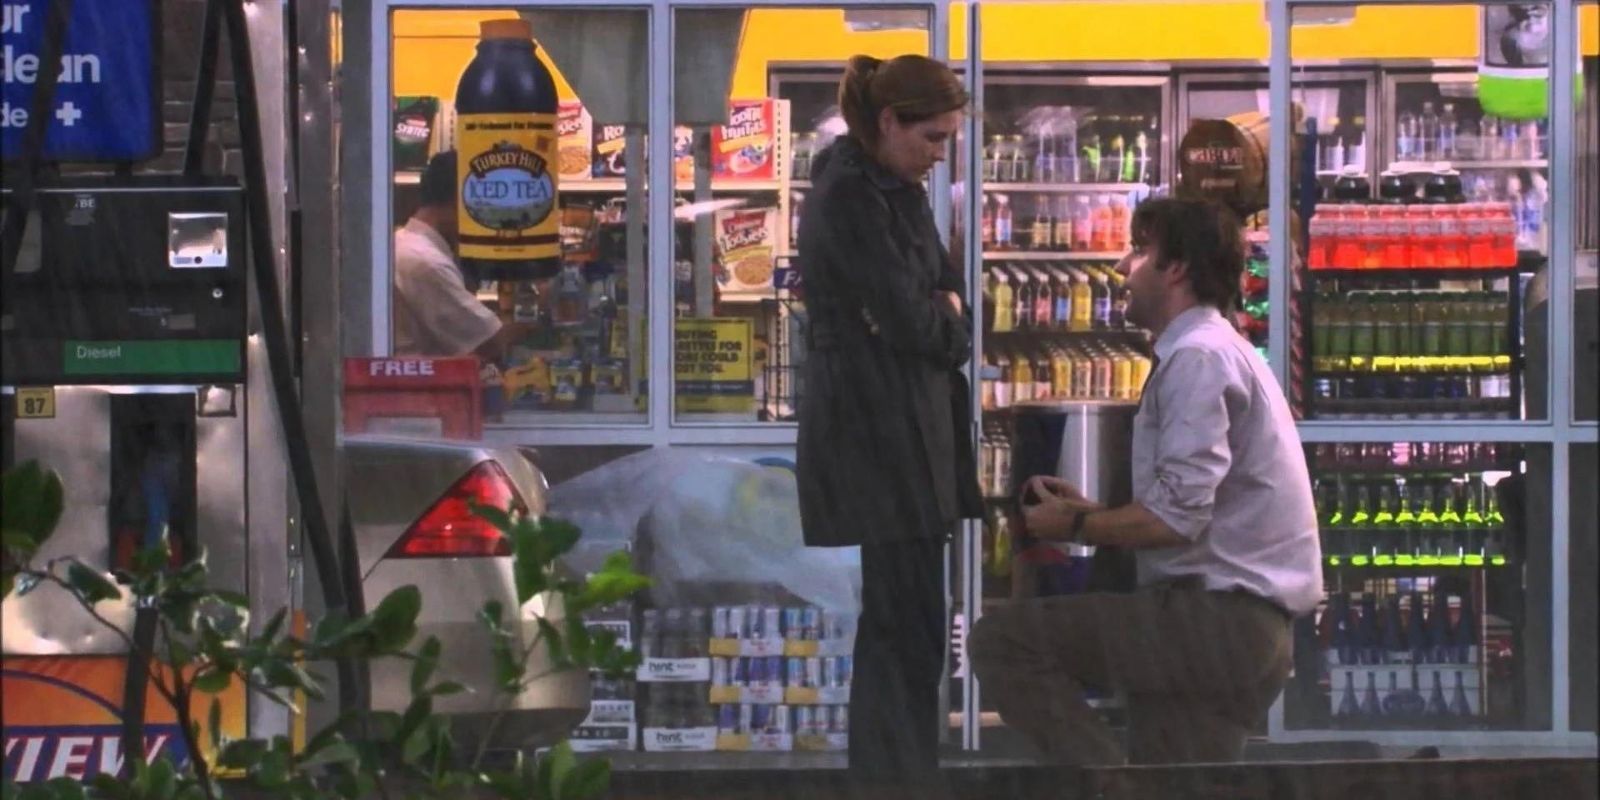 Jim proposes to Pam at a gas station in the rain